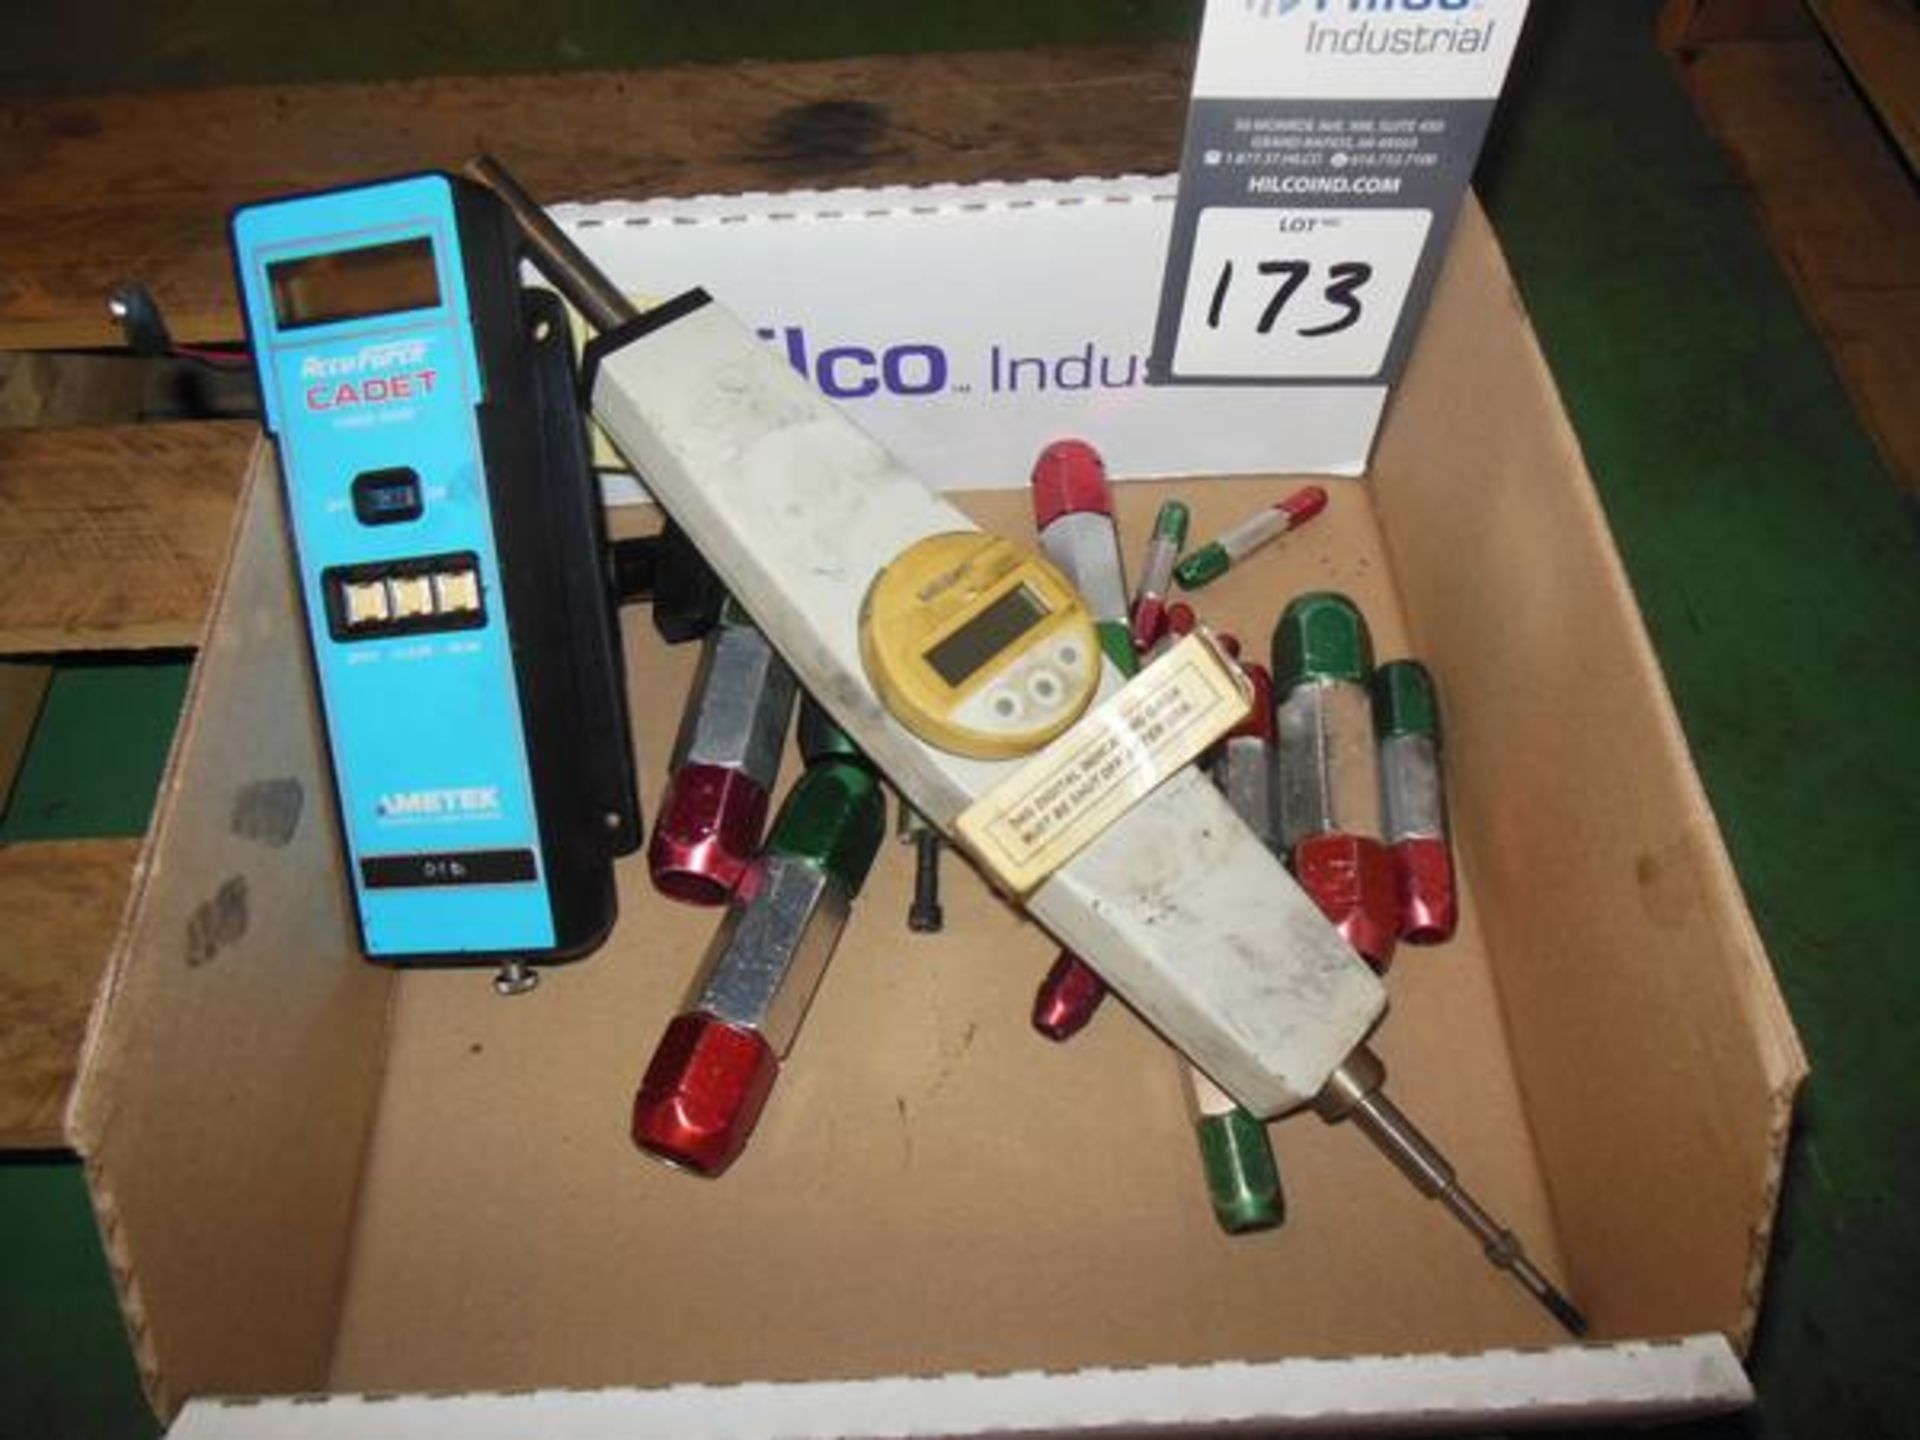 Lot Mitutoyo Gage; with Ametek AcuForce Cadet Force Gage and Assorted Plug Gages  Location: 7333